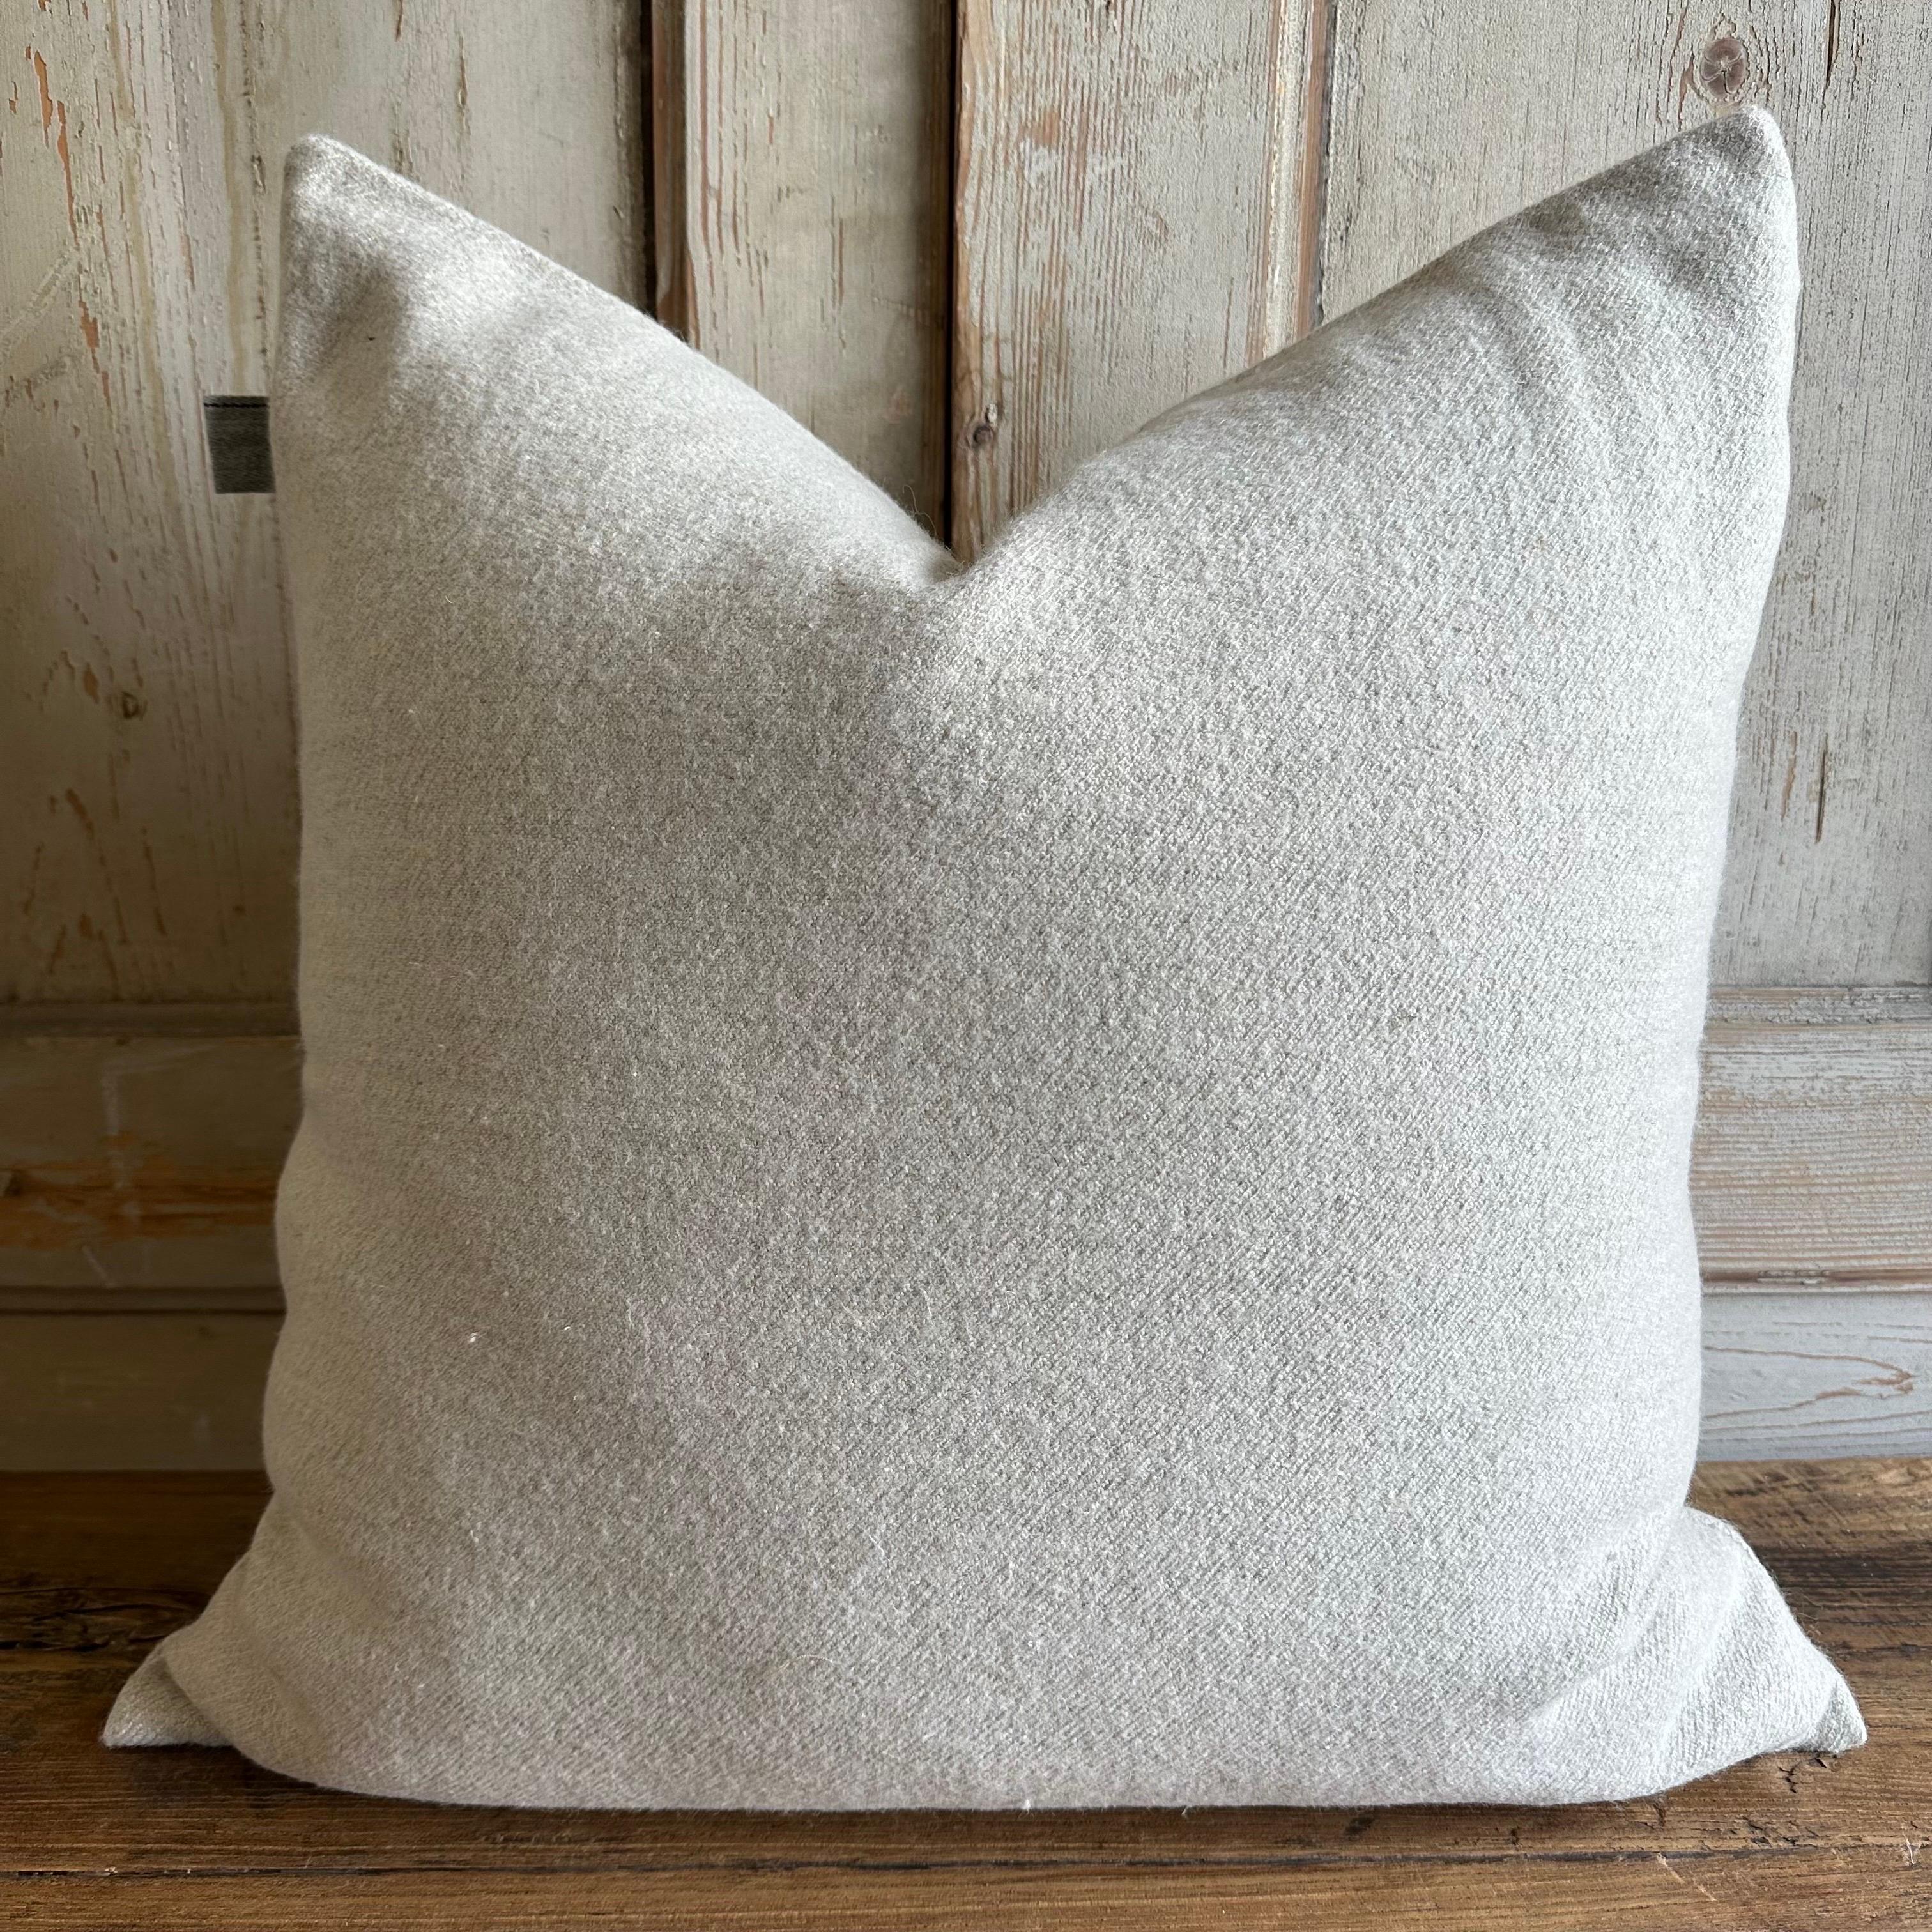 Oatmeal plush wool accent pillow 
Details: thick plush pile, soft to the touch
Color: oatmeal; the color or oatmeal, a greige, white with beige tones.
Size 24x24
Includes down feather insert
hidden zipper closure.